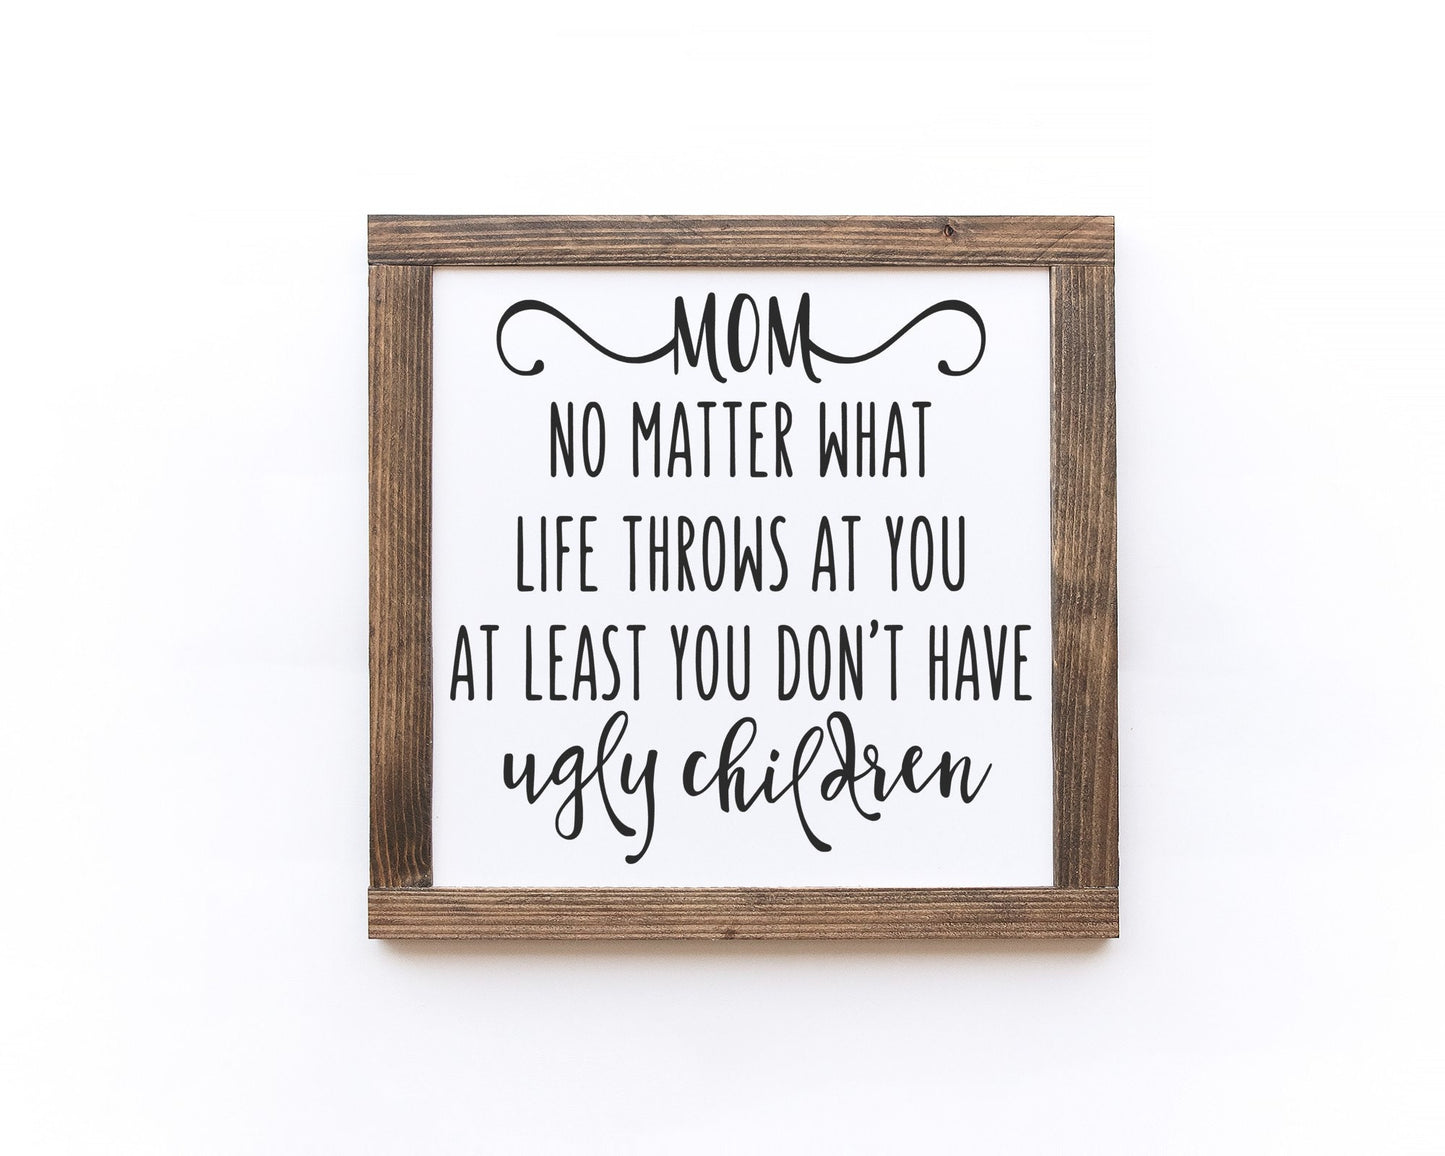 Mom No Matter What Life Throws At You At Least Your Don't Have Ugly Children Wood Sign